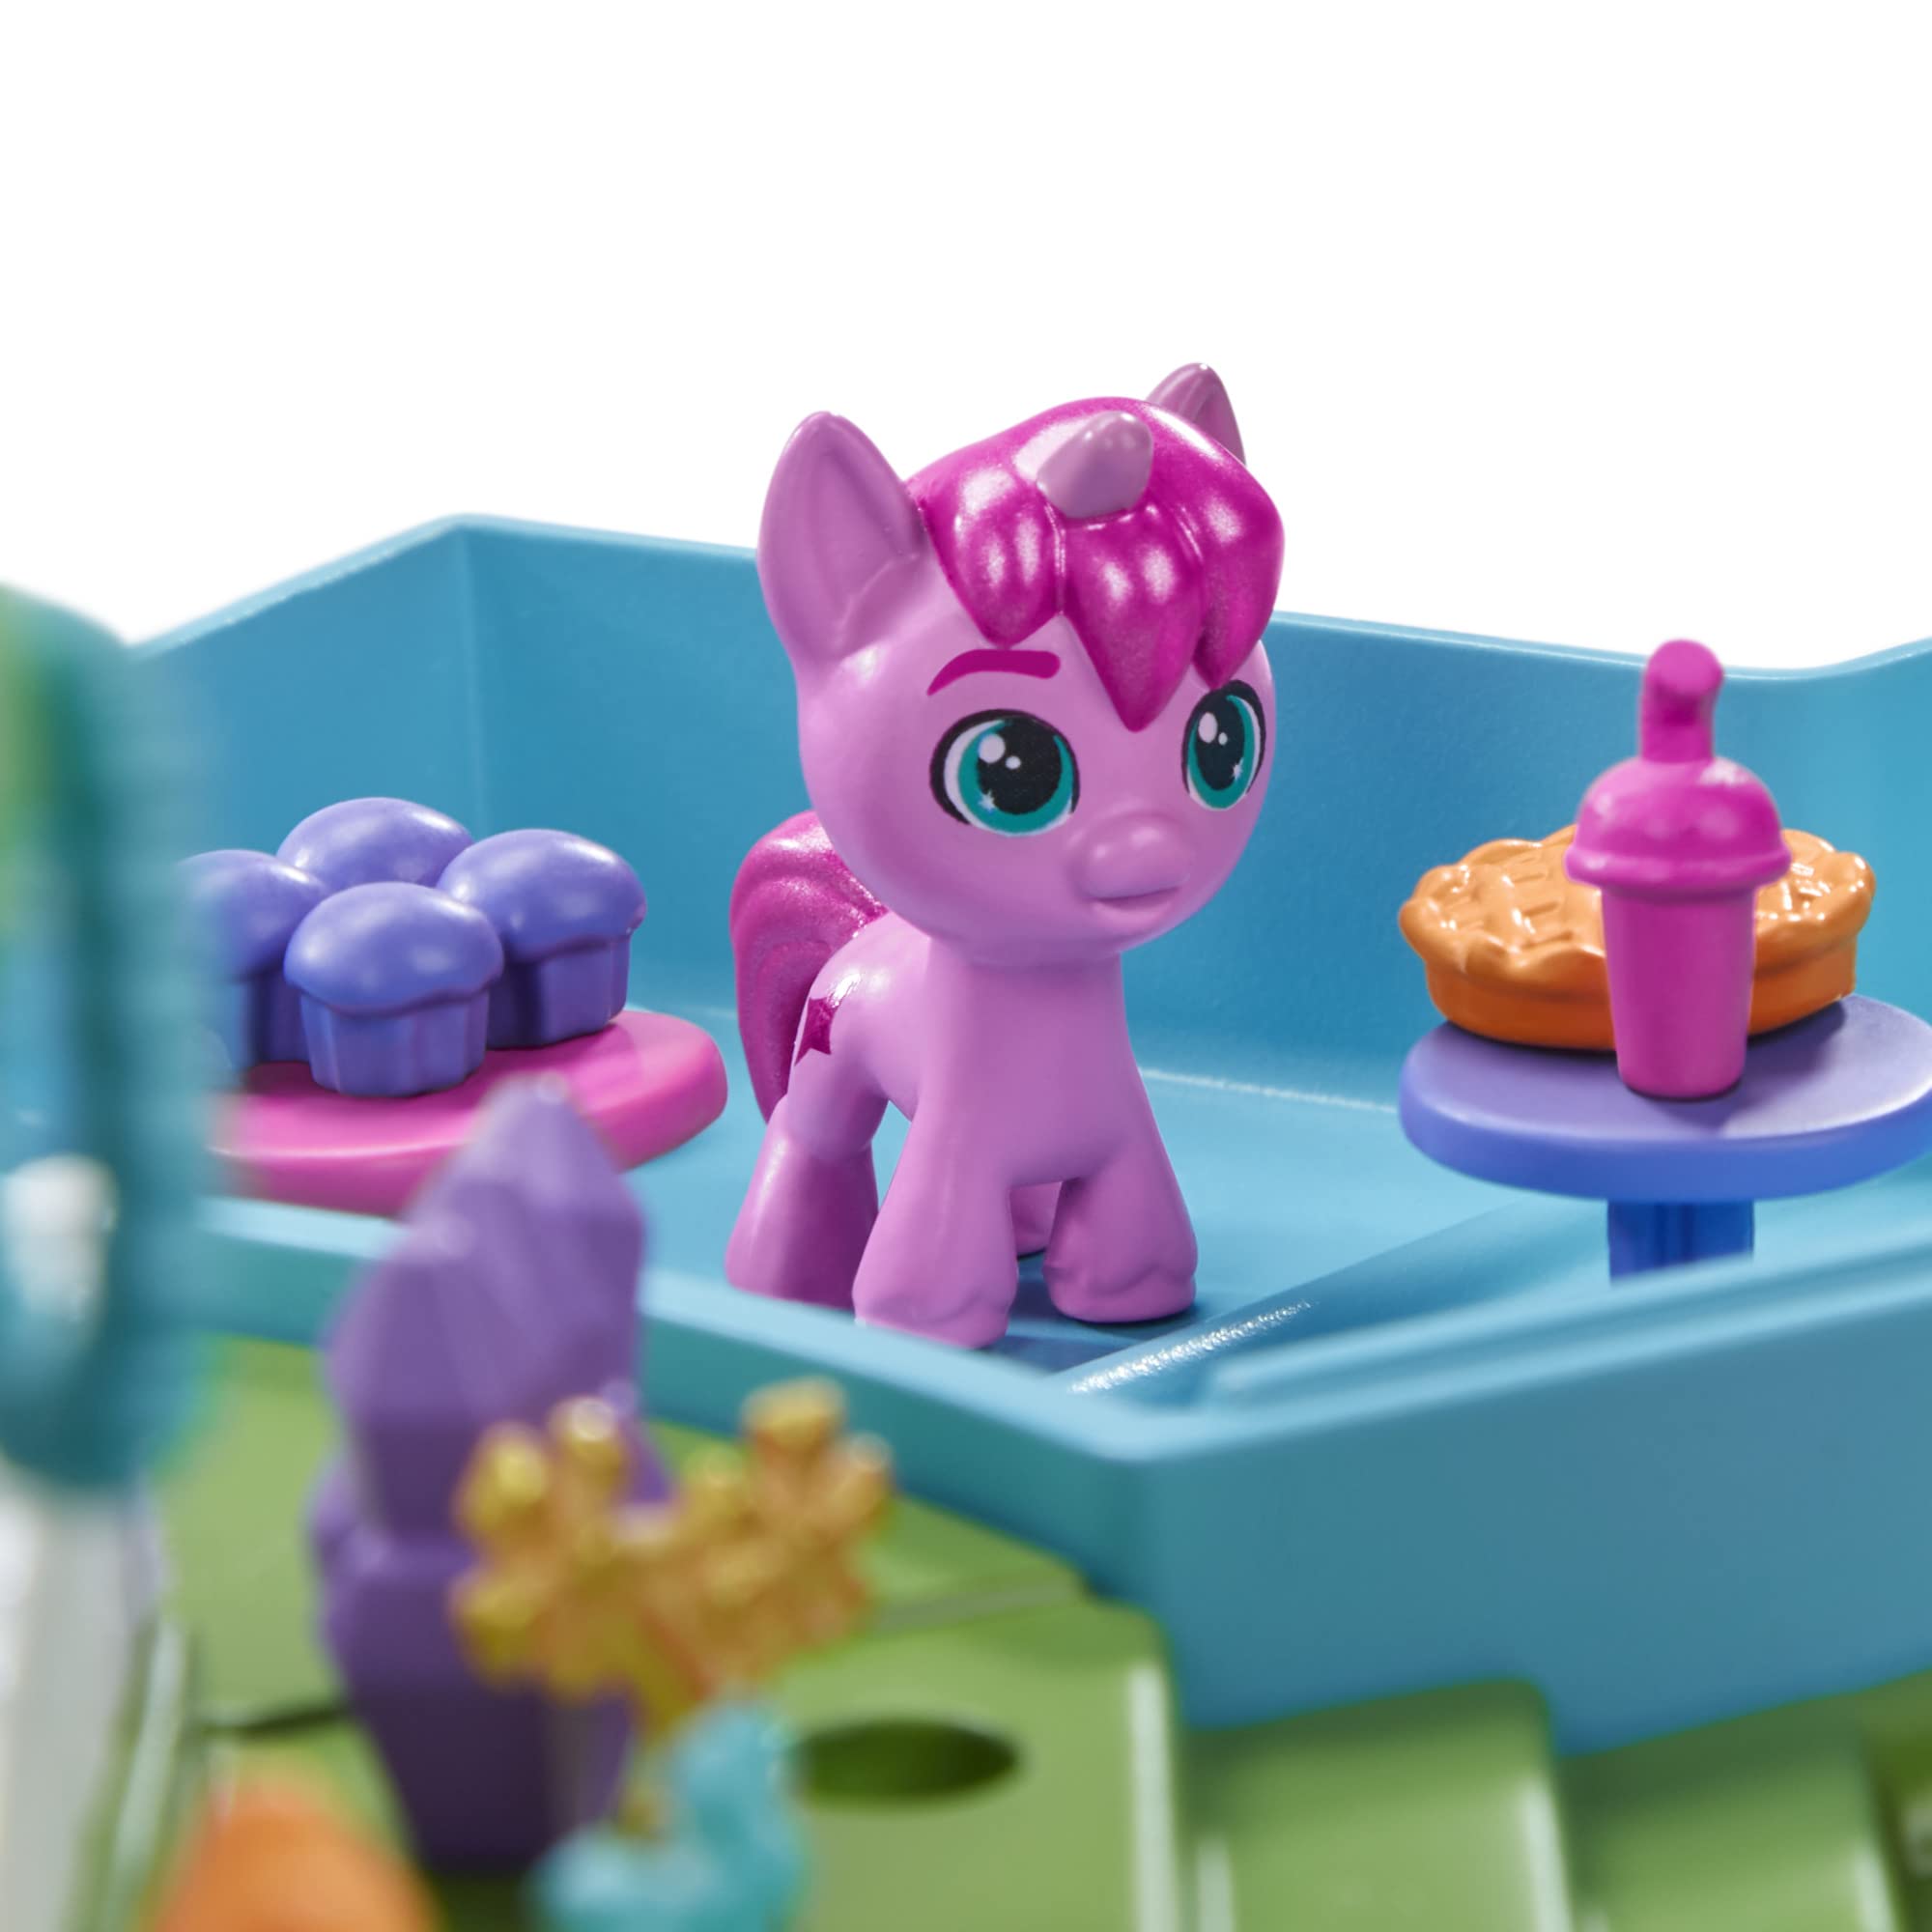 My Little Pony Hasbro Mini World Magic Epic Crystal Brighthouse Toy, Buildable Playset with 5 Collectible Figures, for Kids Ages 5 and Up